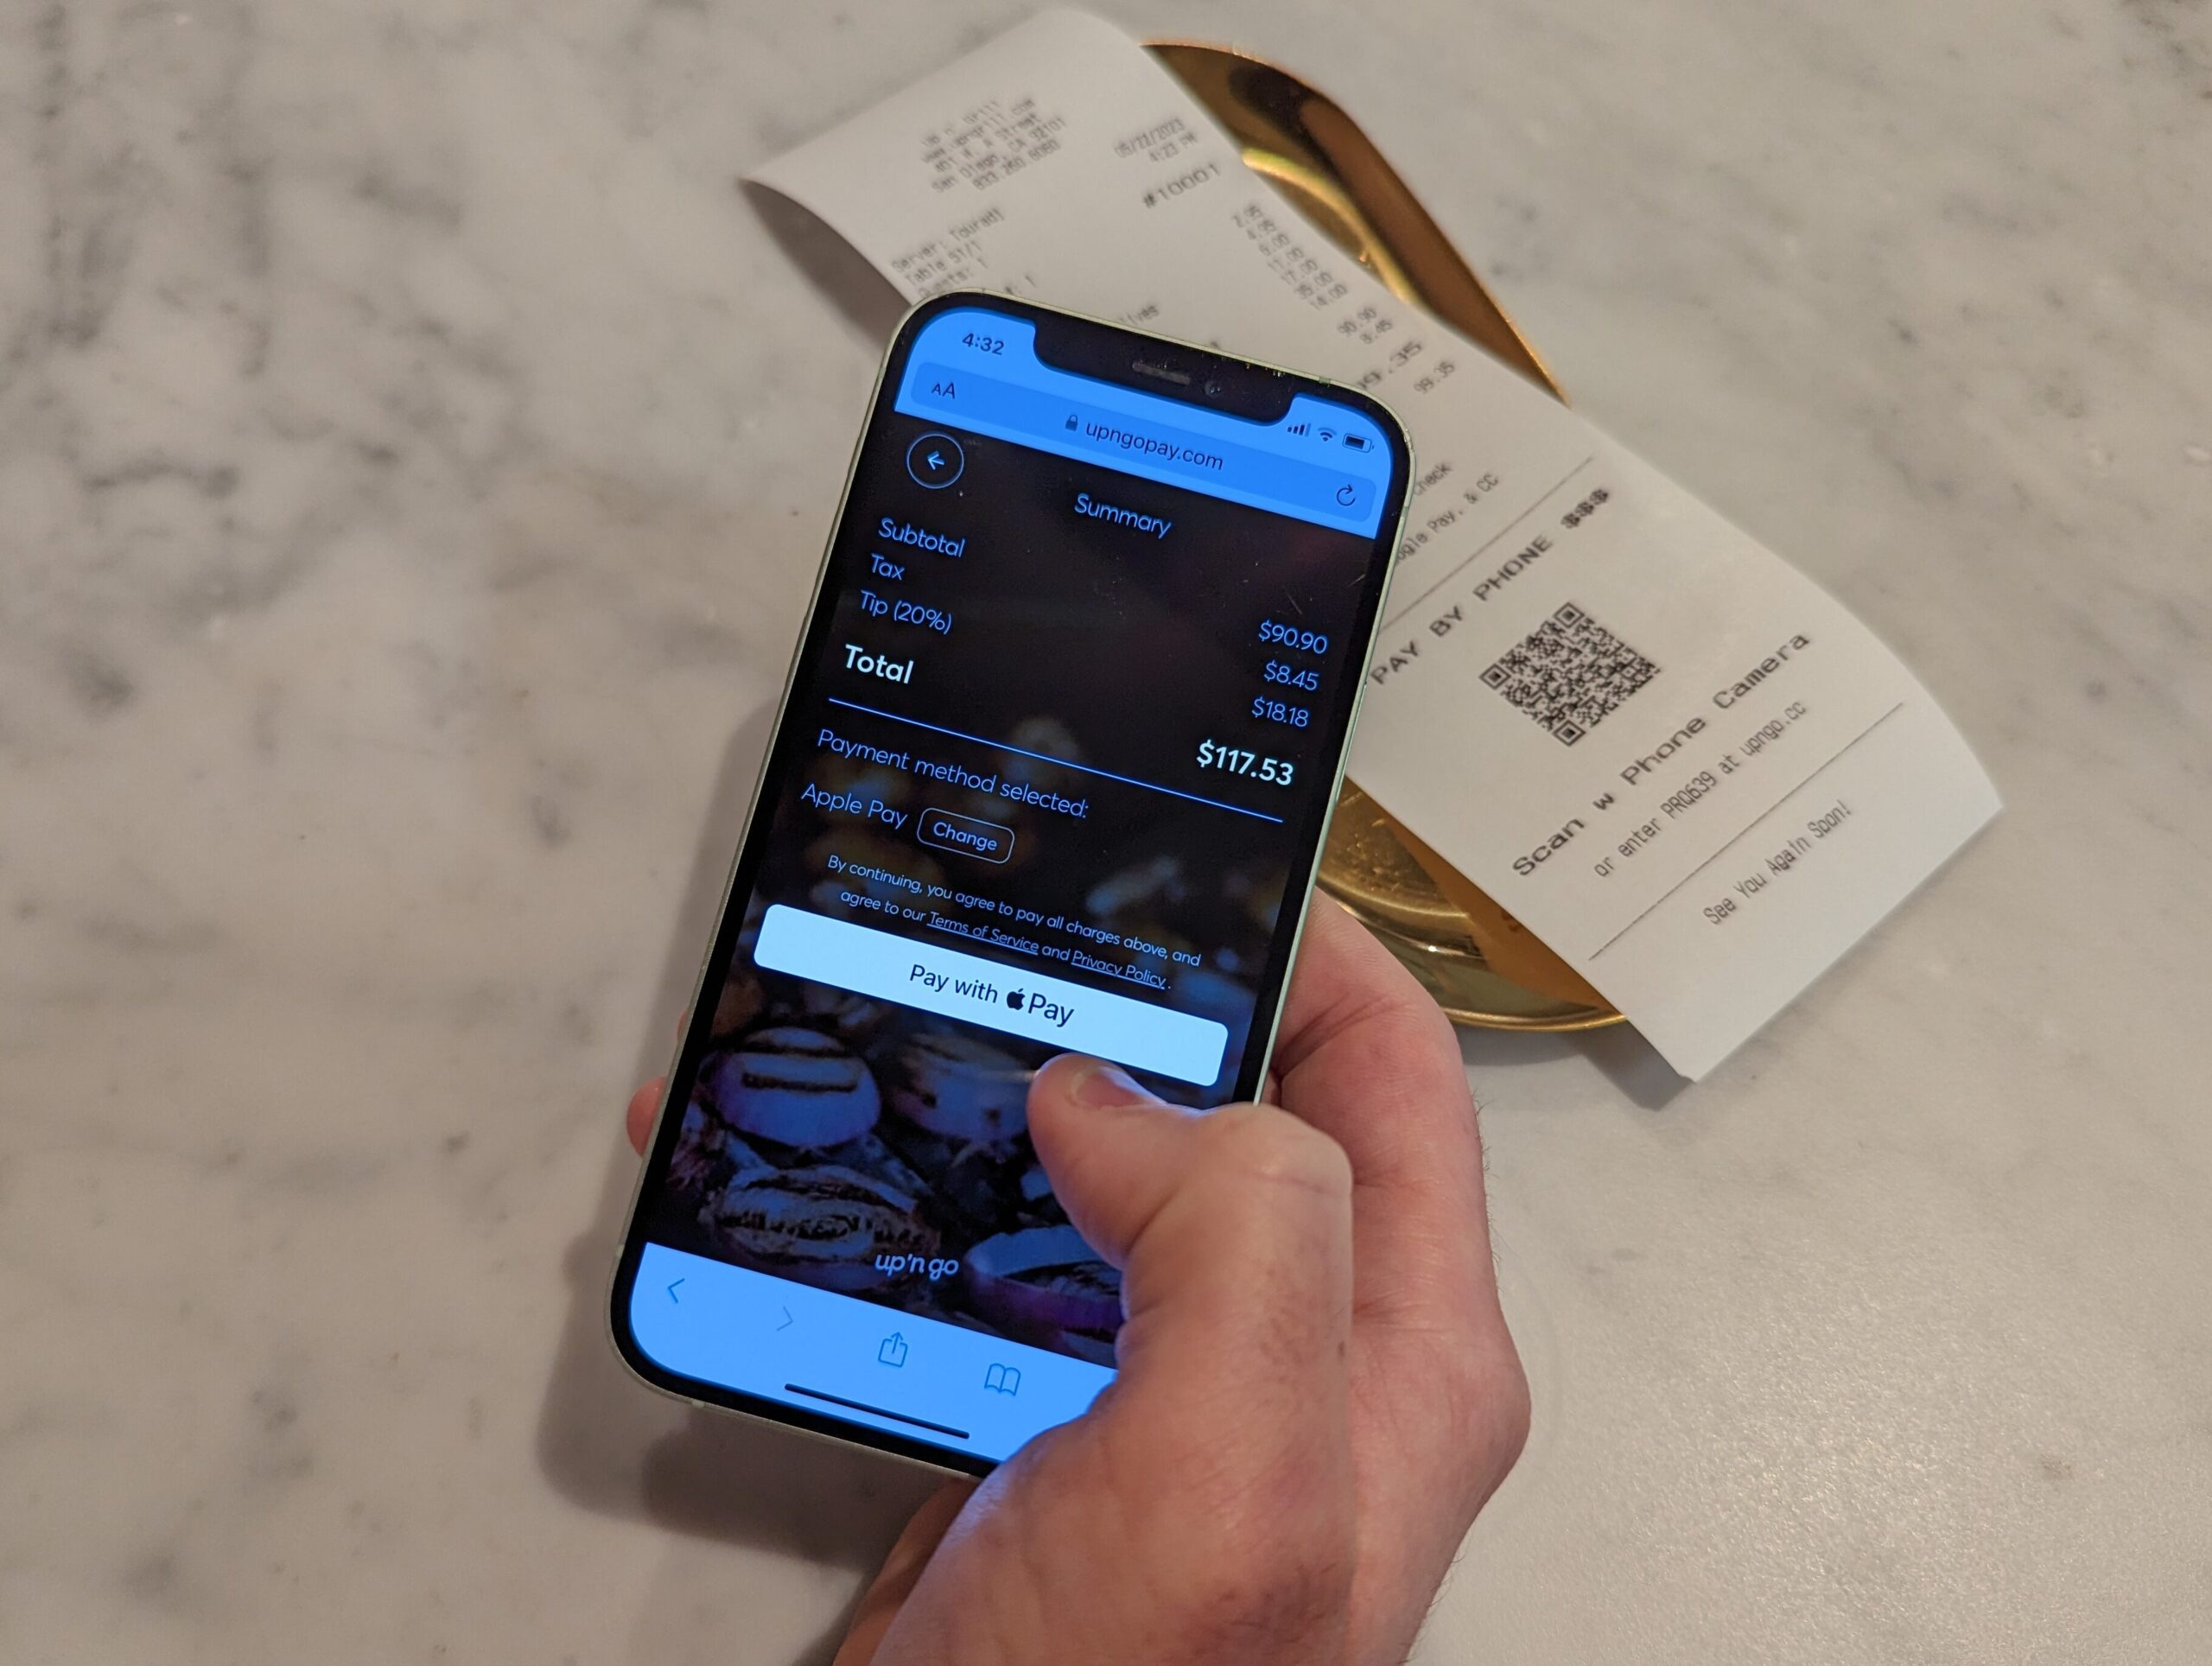 Making a contactless restaurant payment with Apple Pay